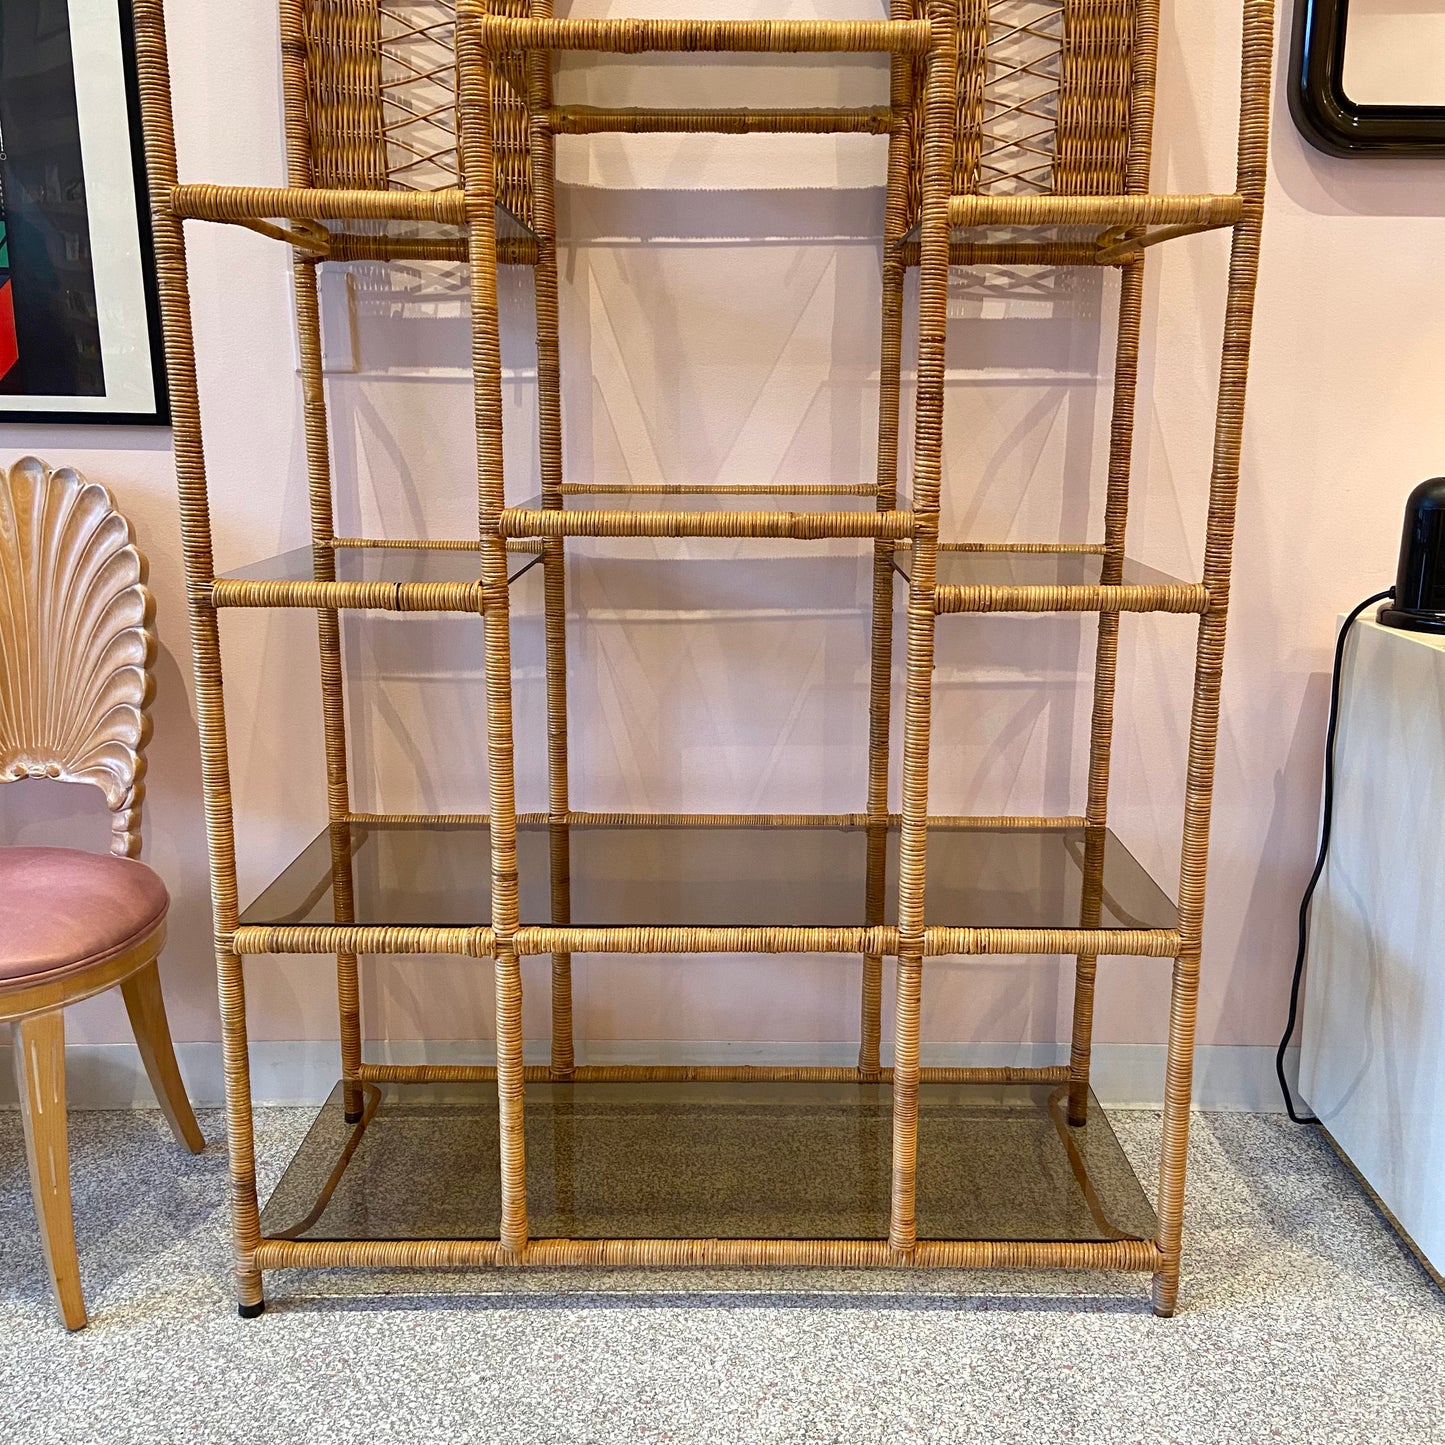 Vintage Wicker Rattan Etagere with Smoked Glass